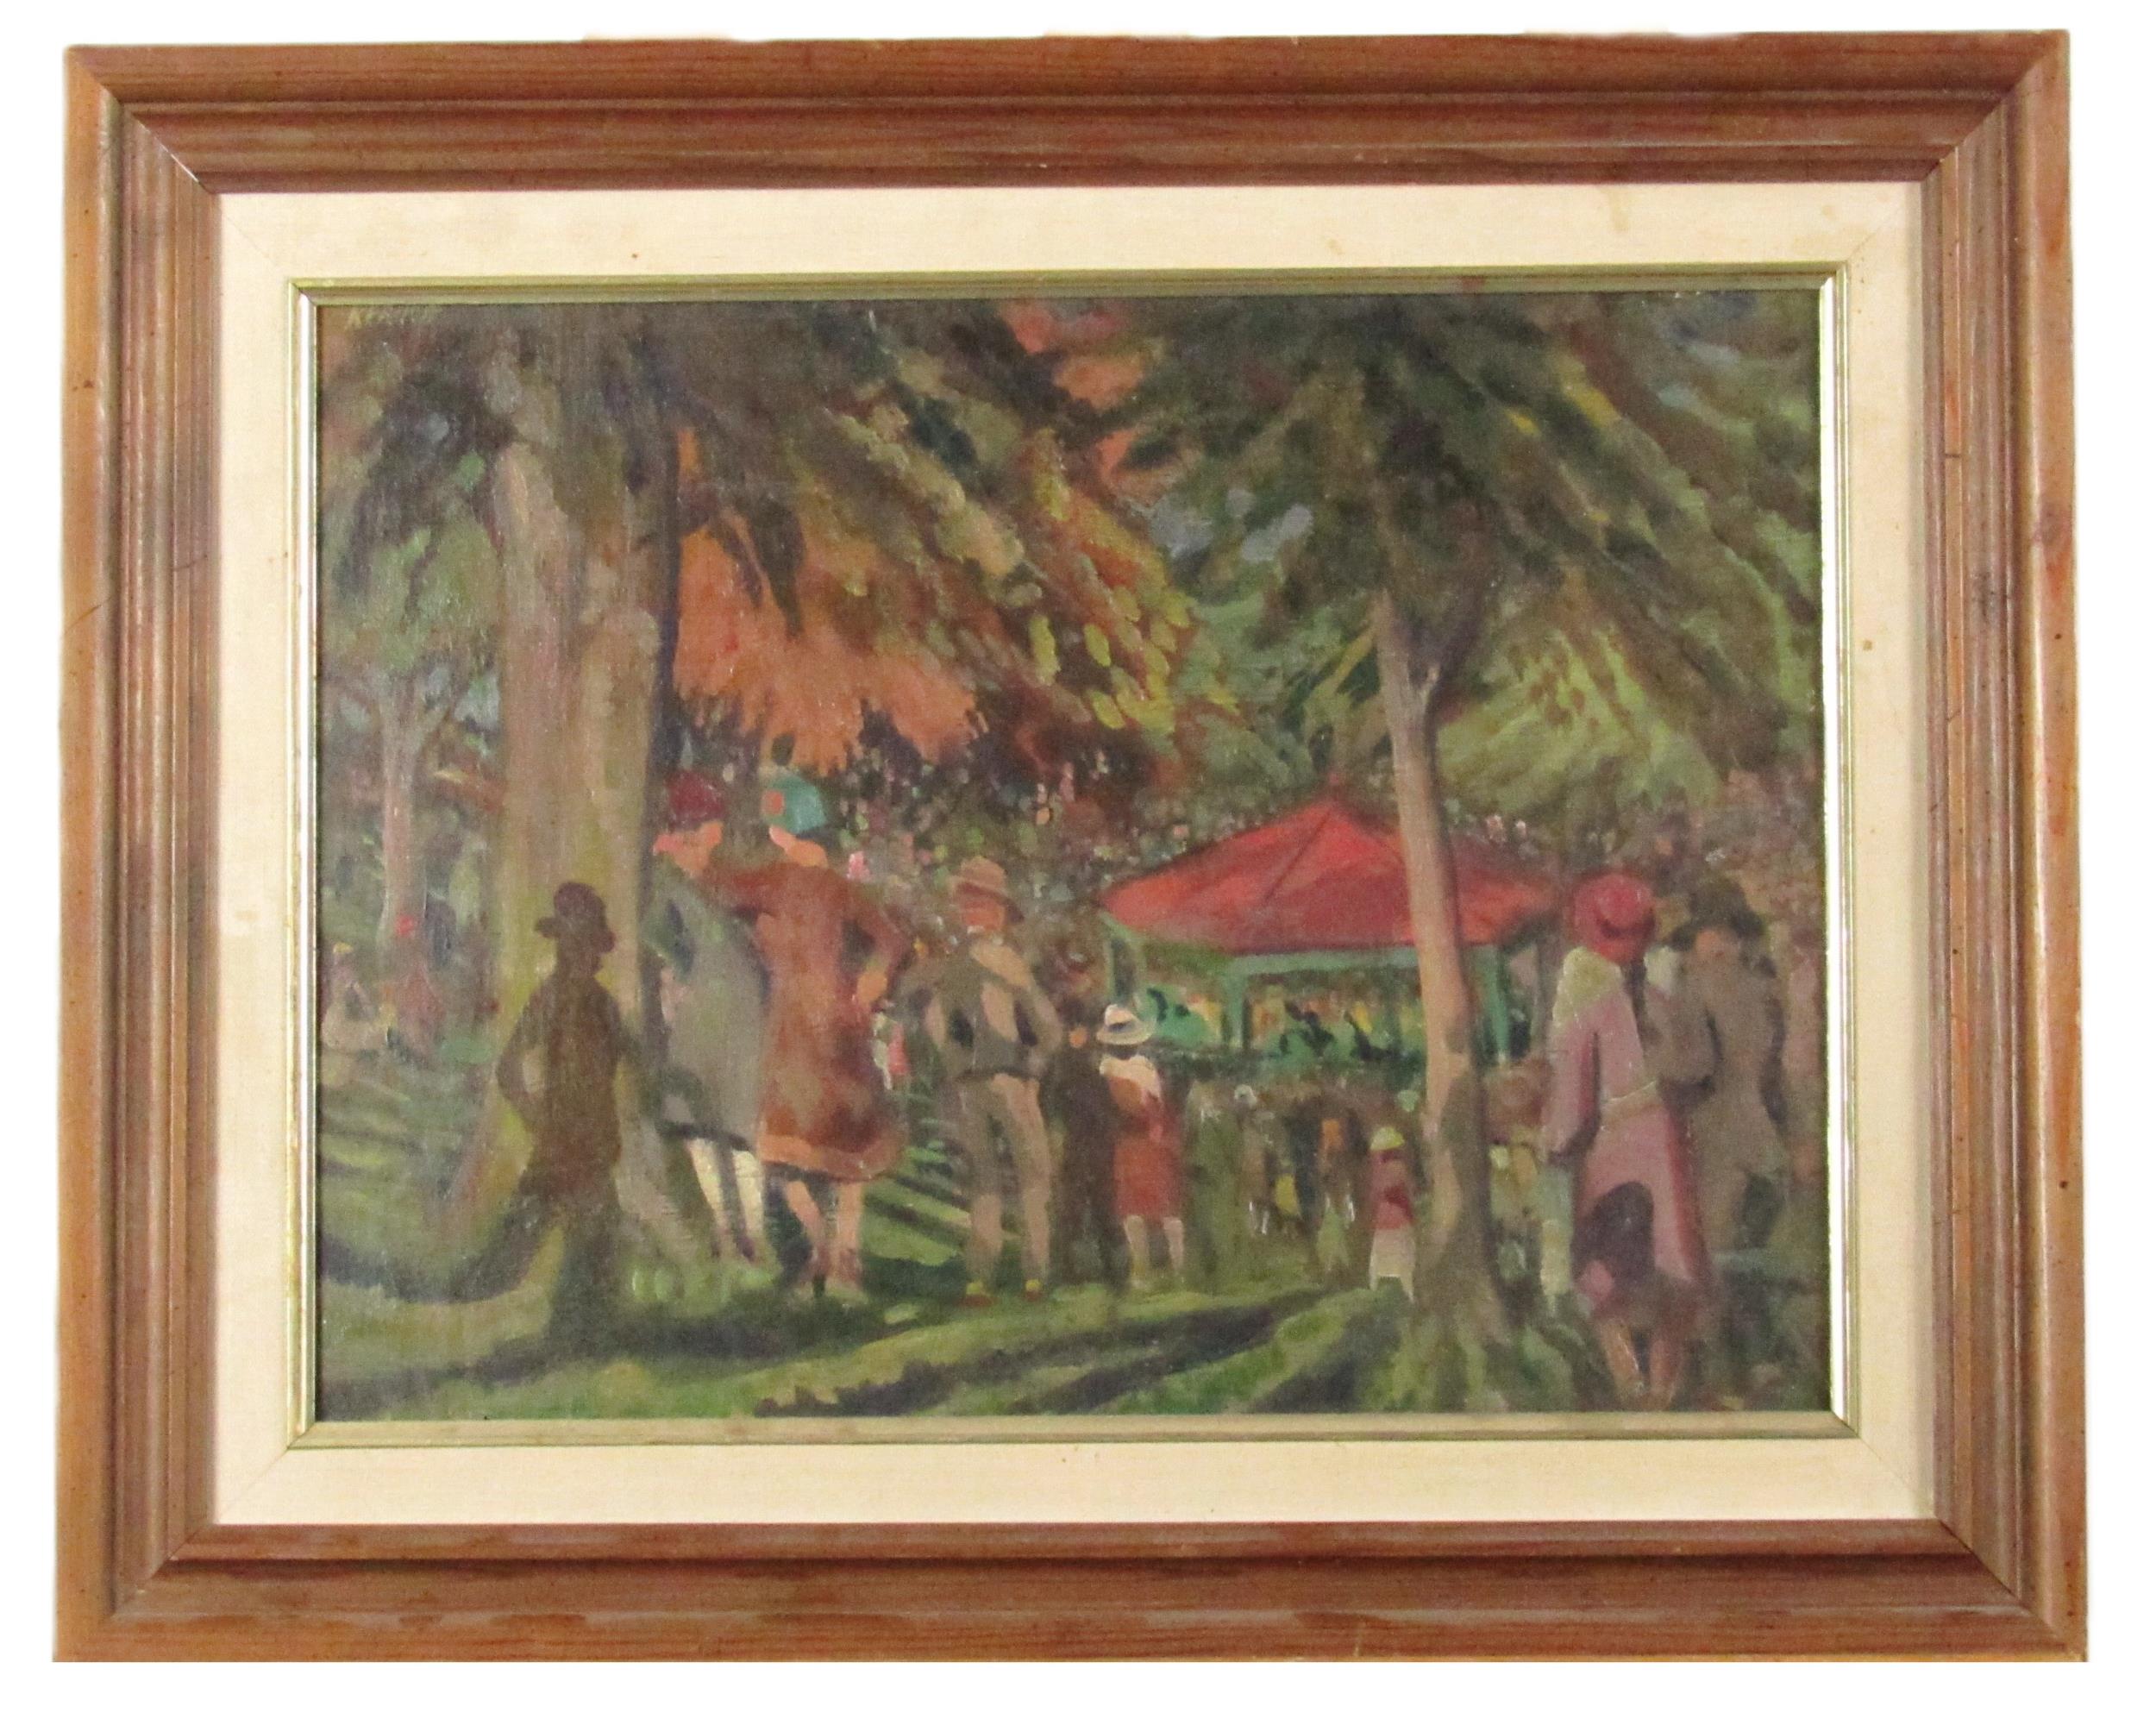 Harry Kernoff (1900-1974)  "Bandstand, The Hollow, Phoenix Park, 1926" O.O.B., approx. 30cms x 40cms - Image 2 of 3